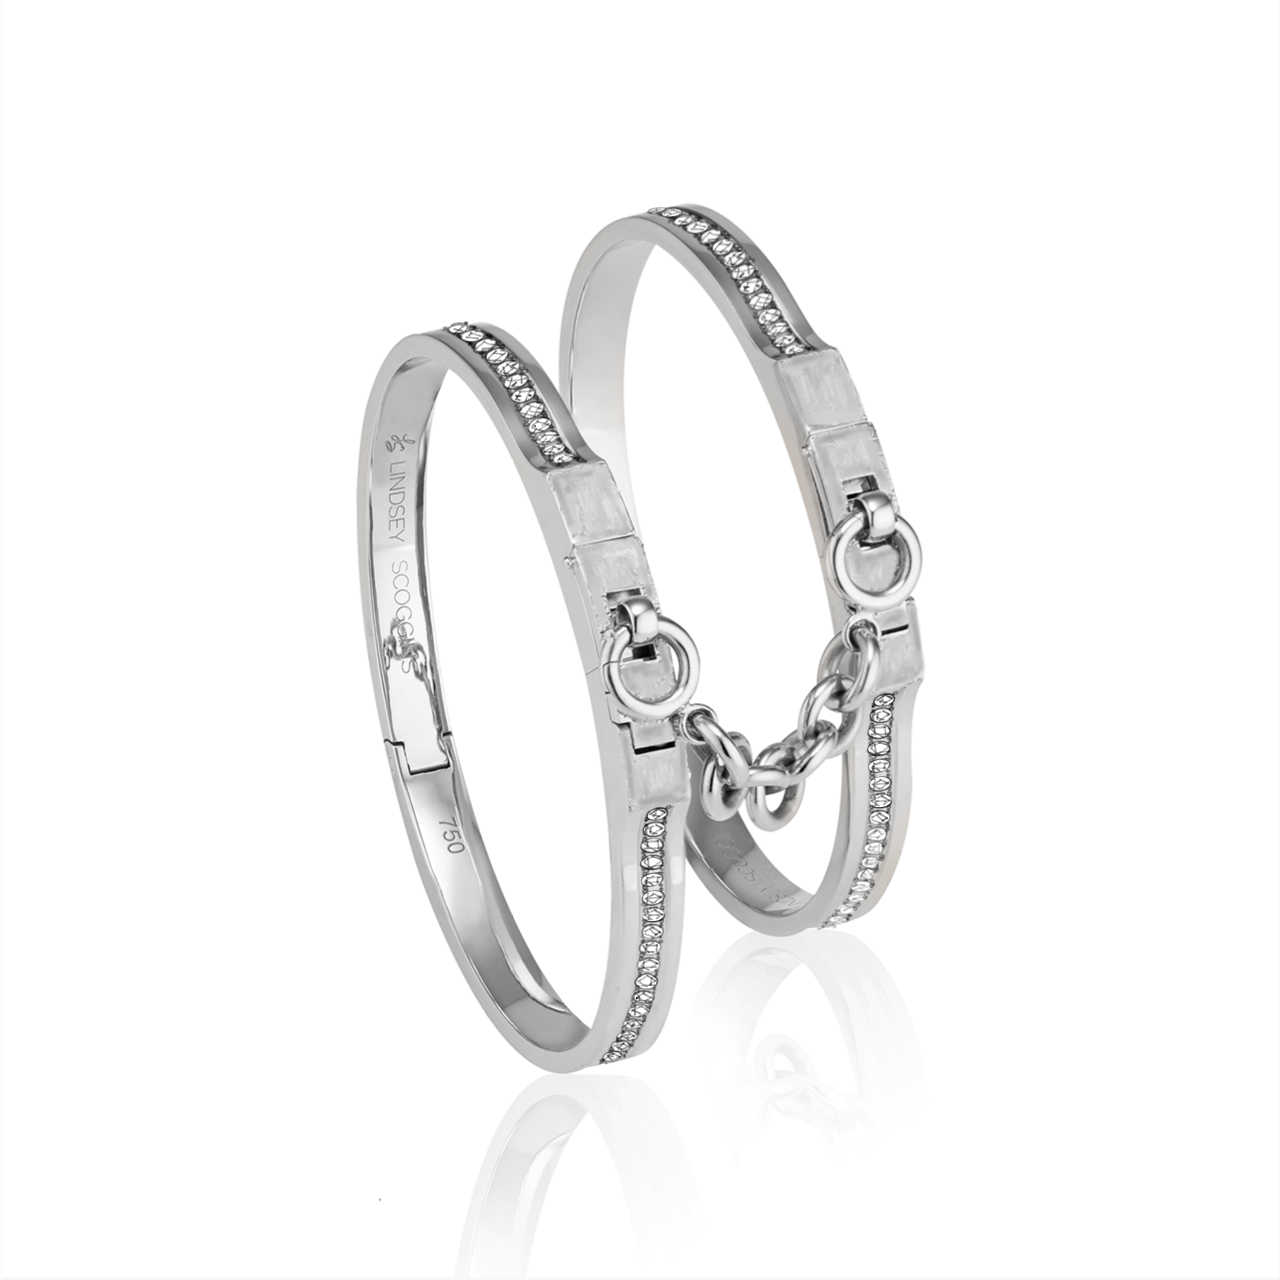 oath double cuffs with pave diamond row